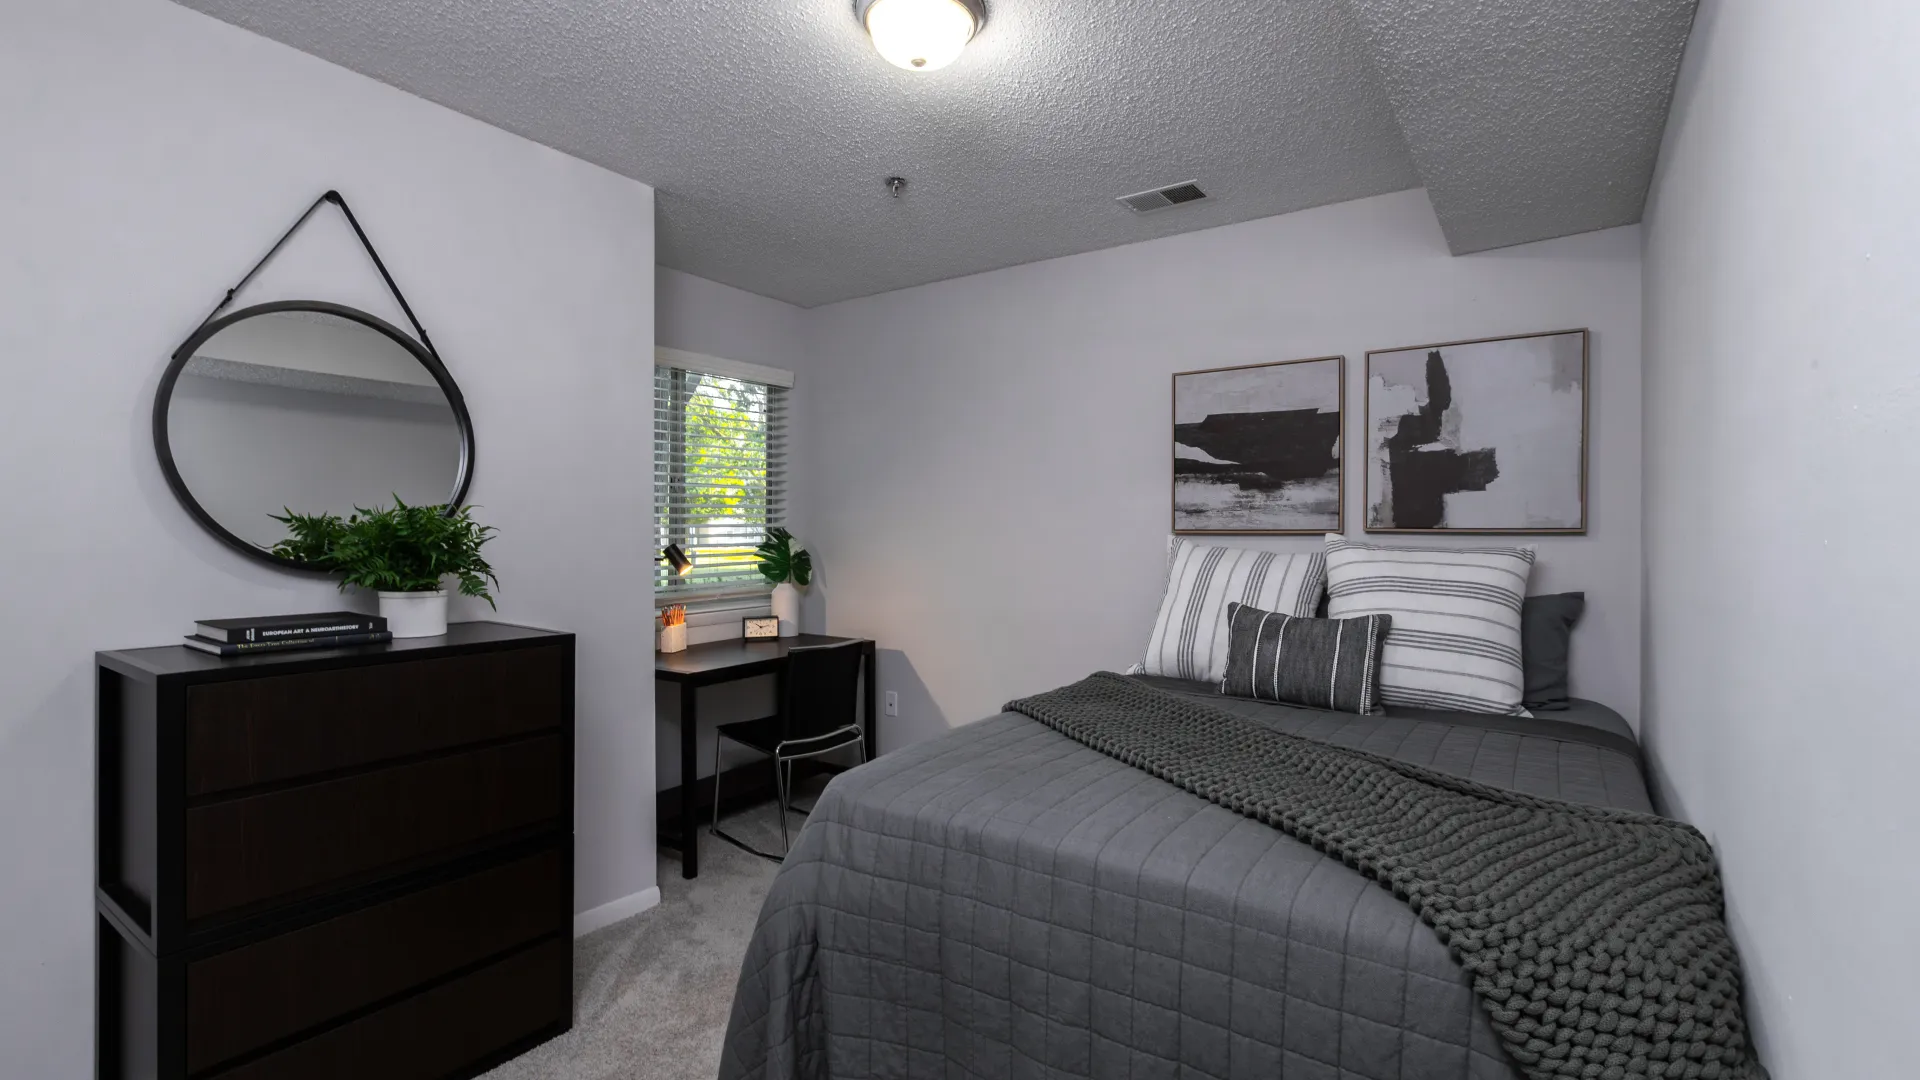 Contemporary bedroom with a gray bed, dark wood furniture, a round mirror, a plant, and a desk by the window.